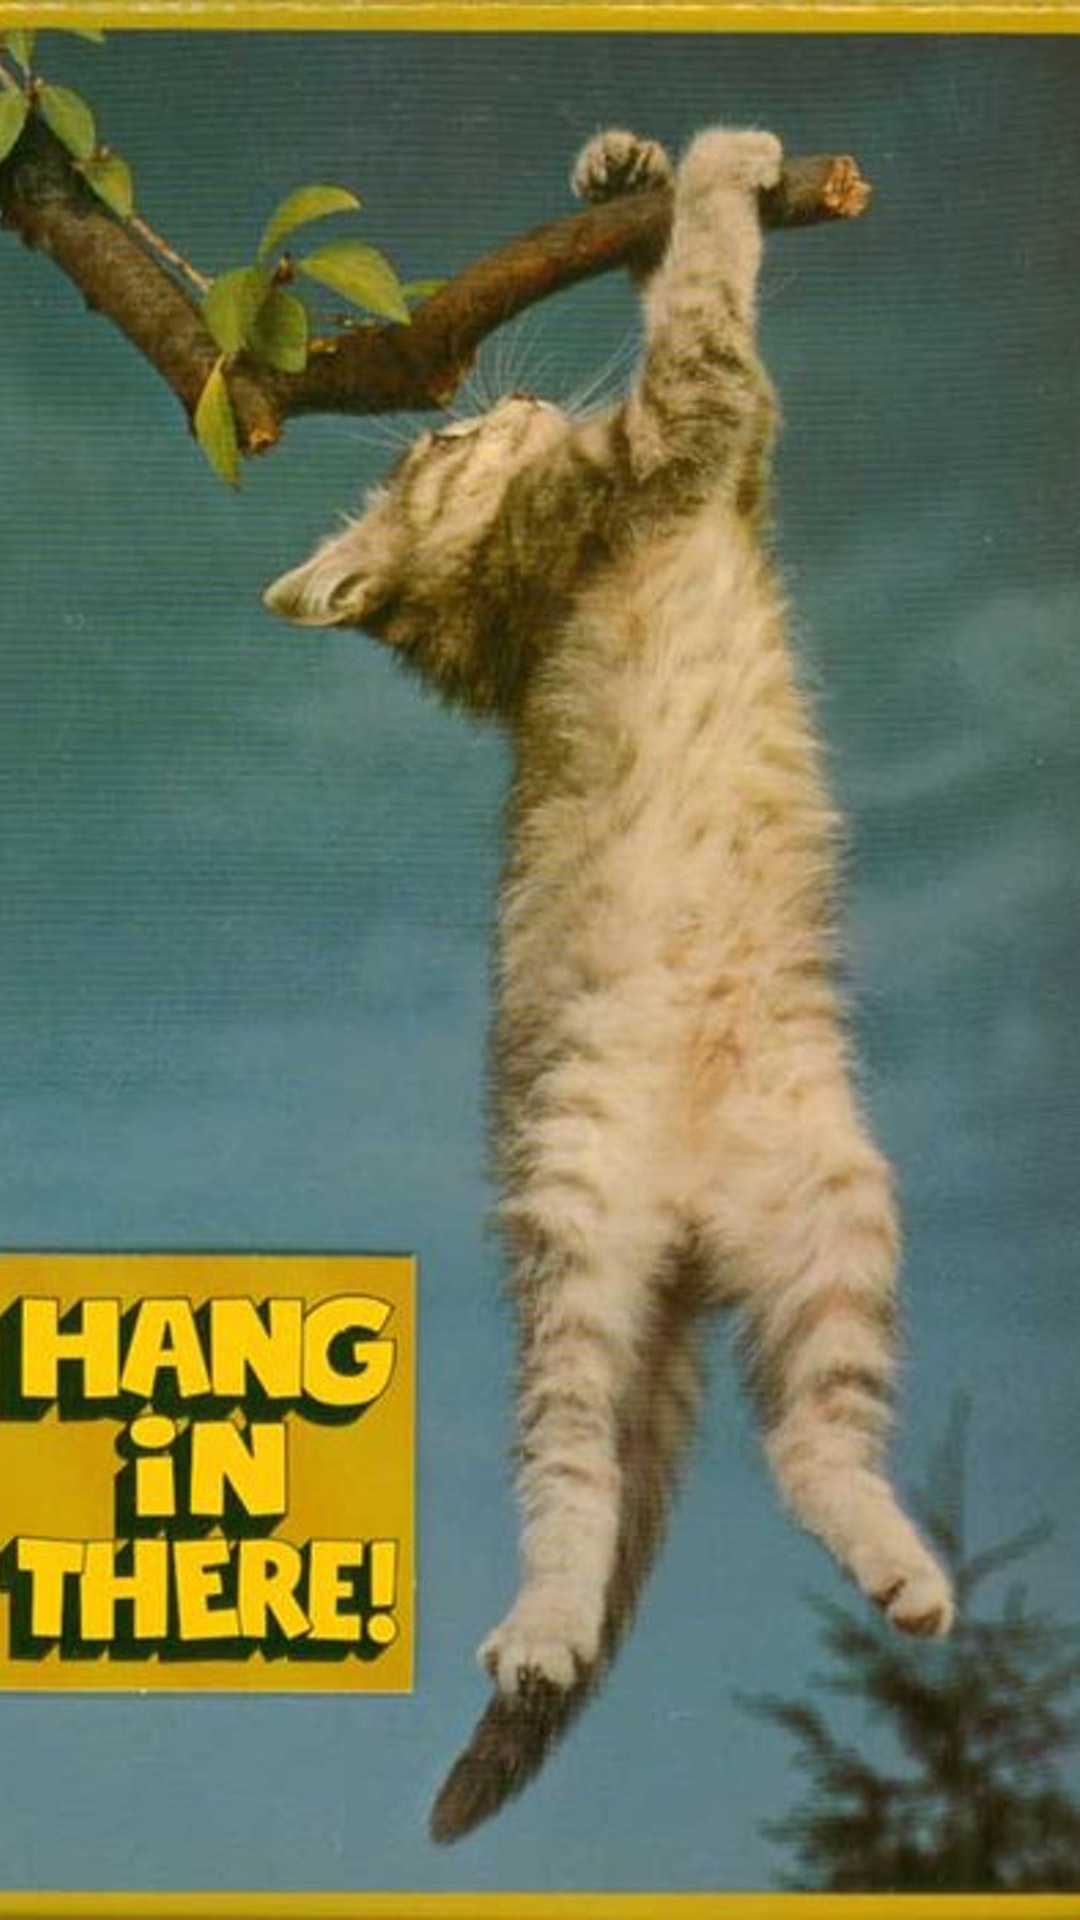 Hang in there by someone from the 70s - Electric Objects